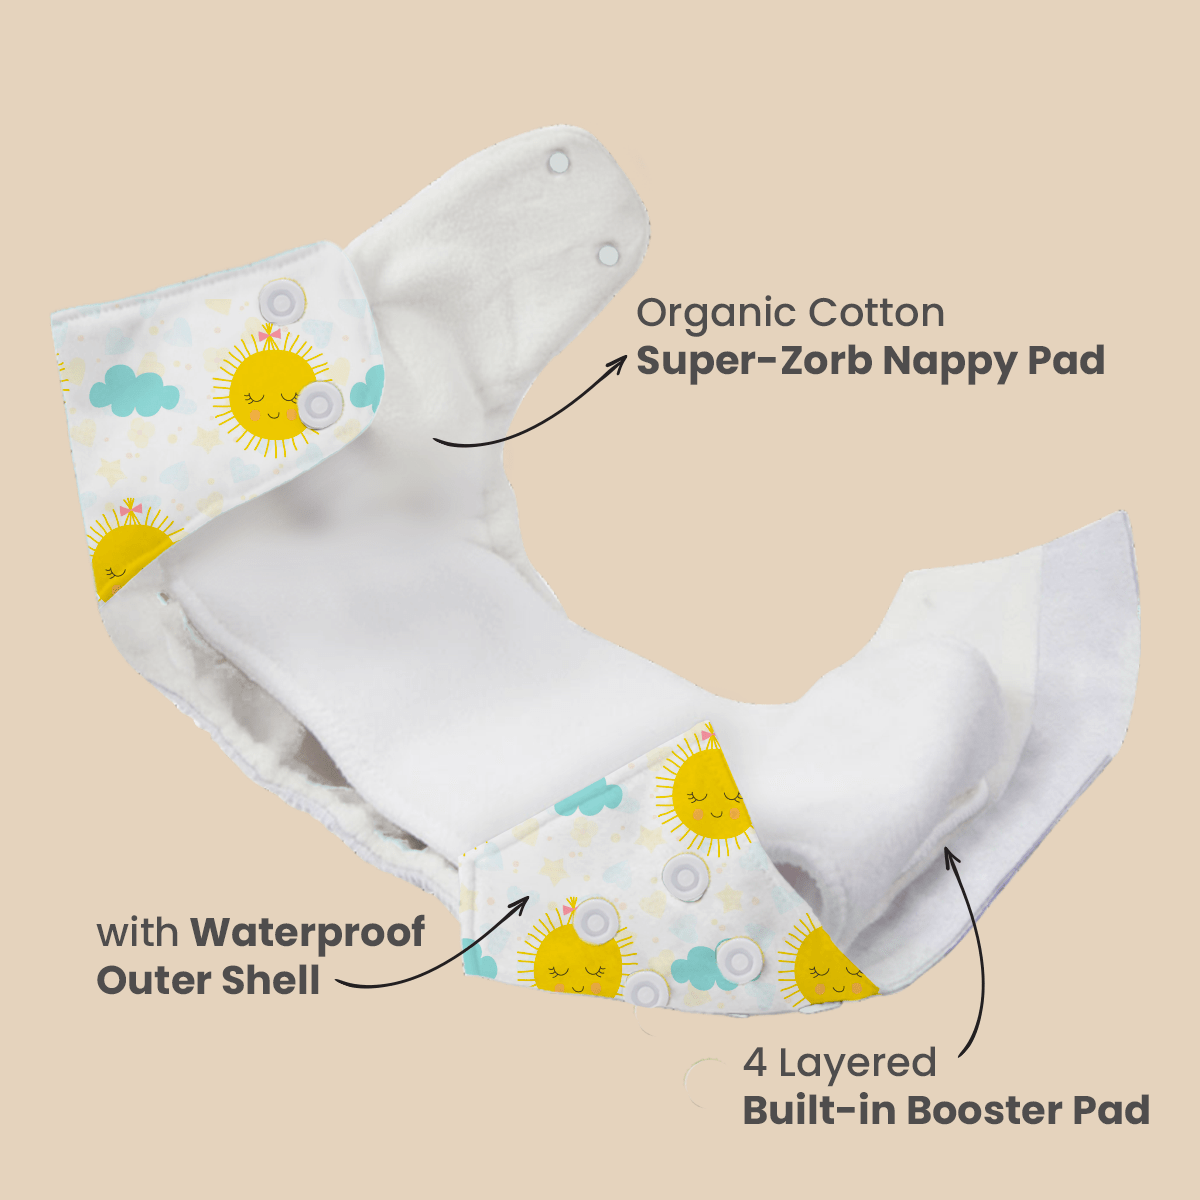 Amazon.com: HEALLILY Reusable Diapers for Adults Reusable Incontinence Pants  Cloth Diaper Wraps Washable Overnight Leakfree Underwear for Women Men  Bariatric Seniors Patients Size M (Random Color) : Health & Household